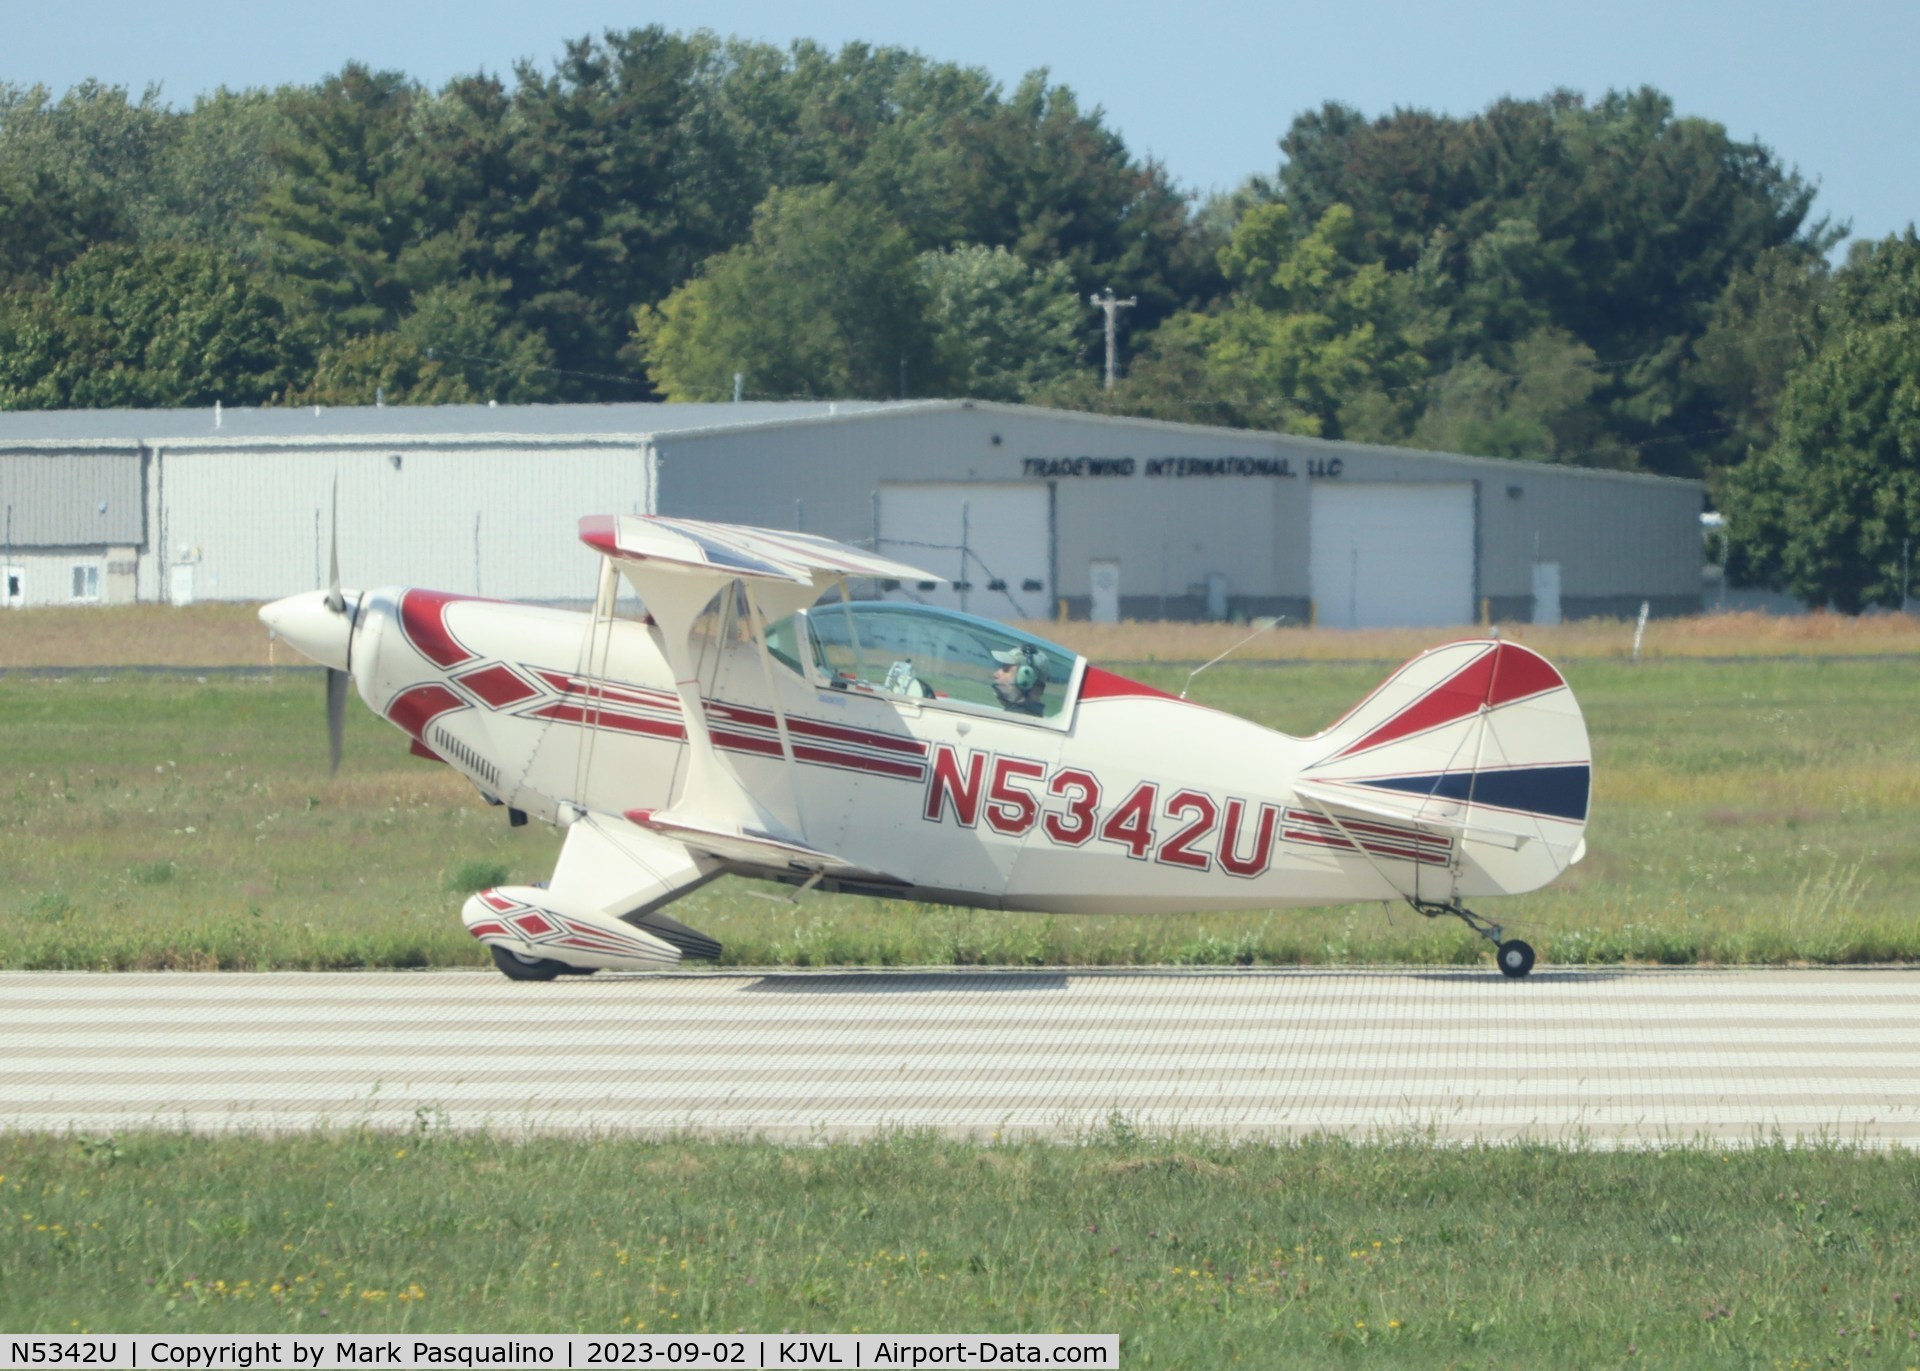 N5342U, Christen Pitts S-2B Special C/N 5085, Pitts S-2B